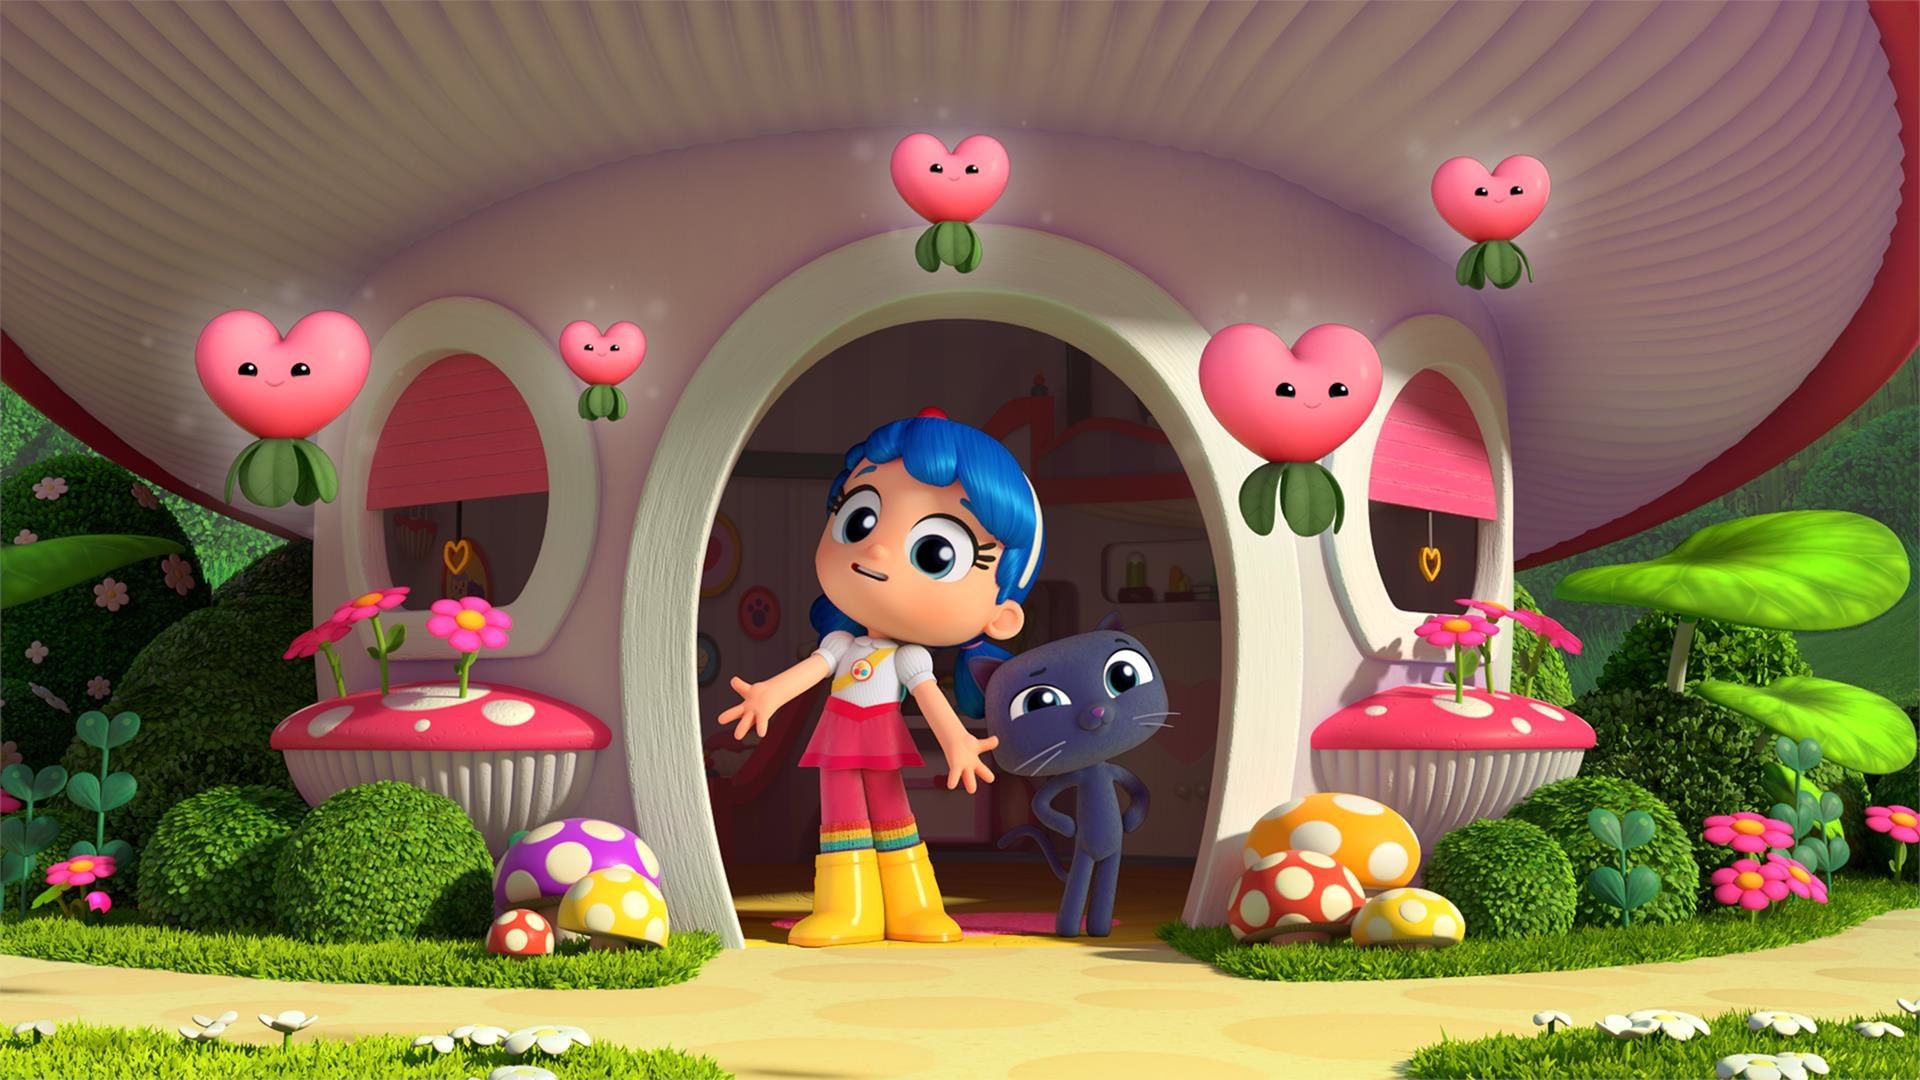 FIRST LOOK: 'True and the Rainbow Kingdom' Returns to Netflix